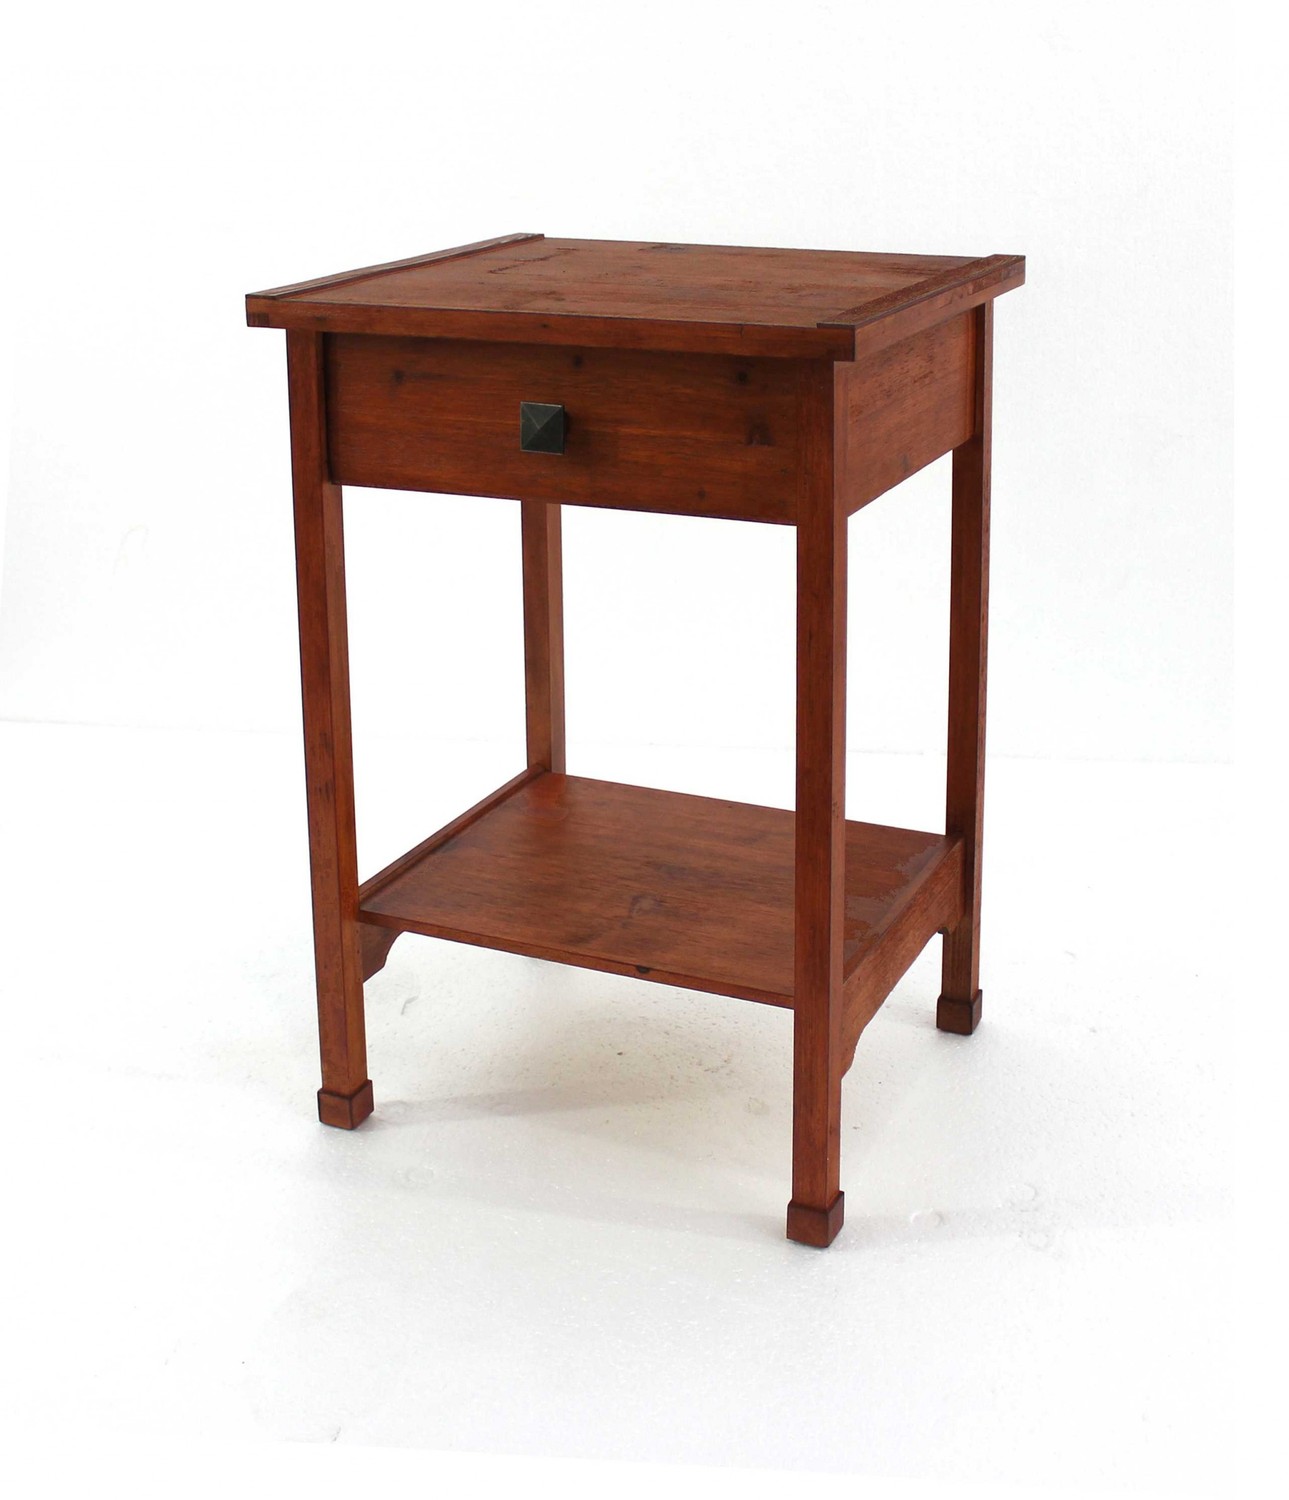 15" x 18" x 24" Cherry, 1 Drawer, Rustic Wooden - Accent Table